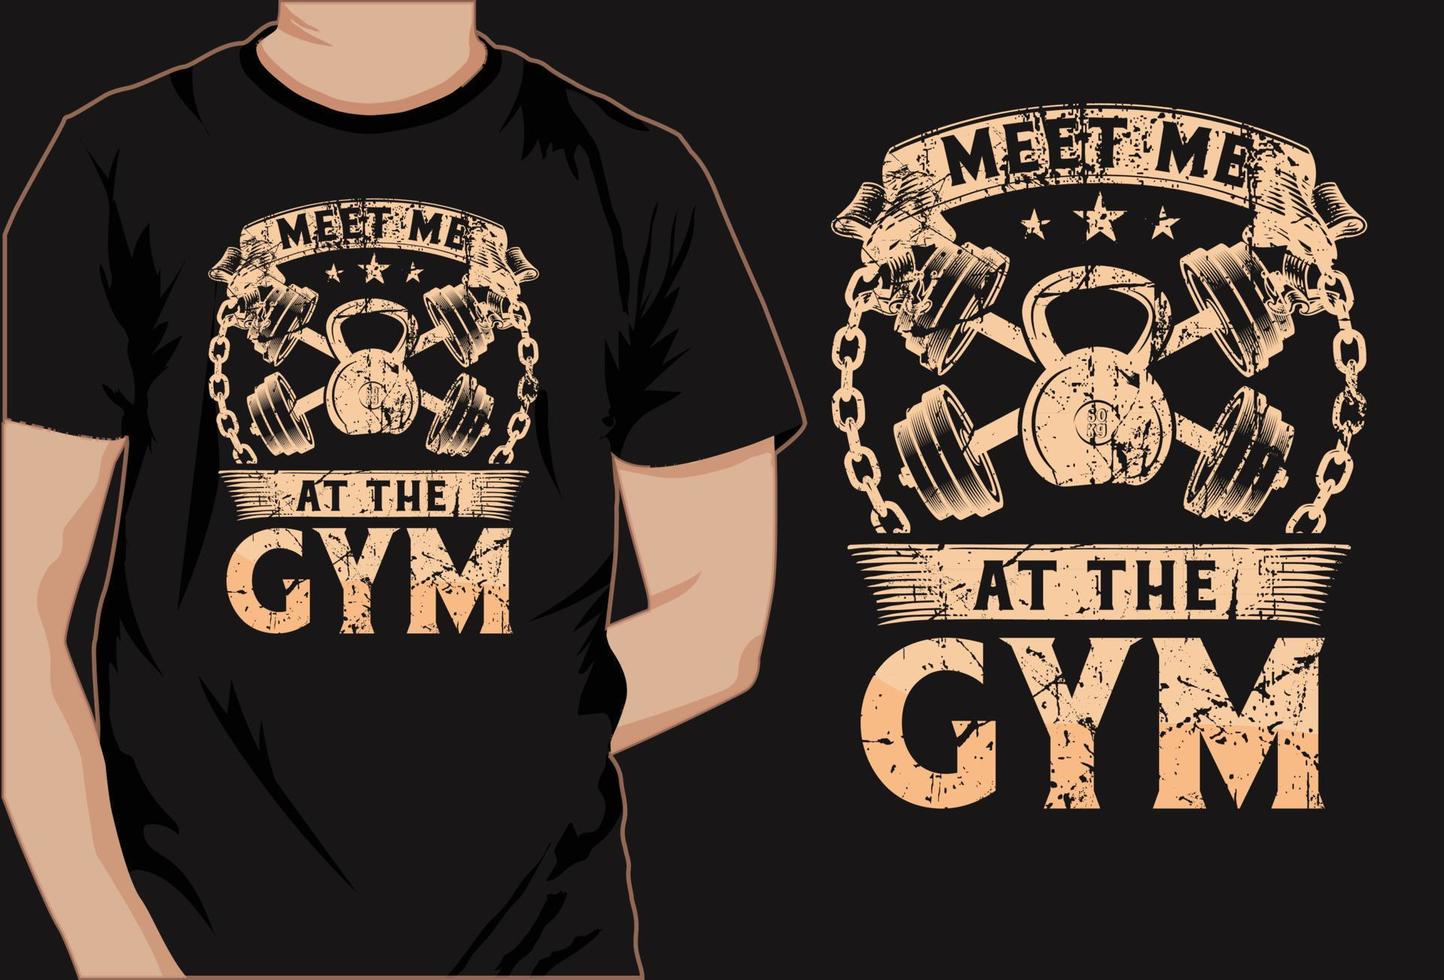 Gym fitness CrossFit workout vector elements and t shirt free download